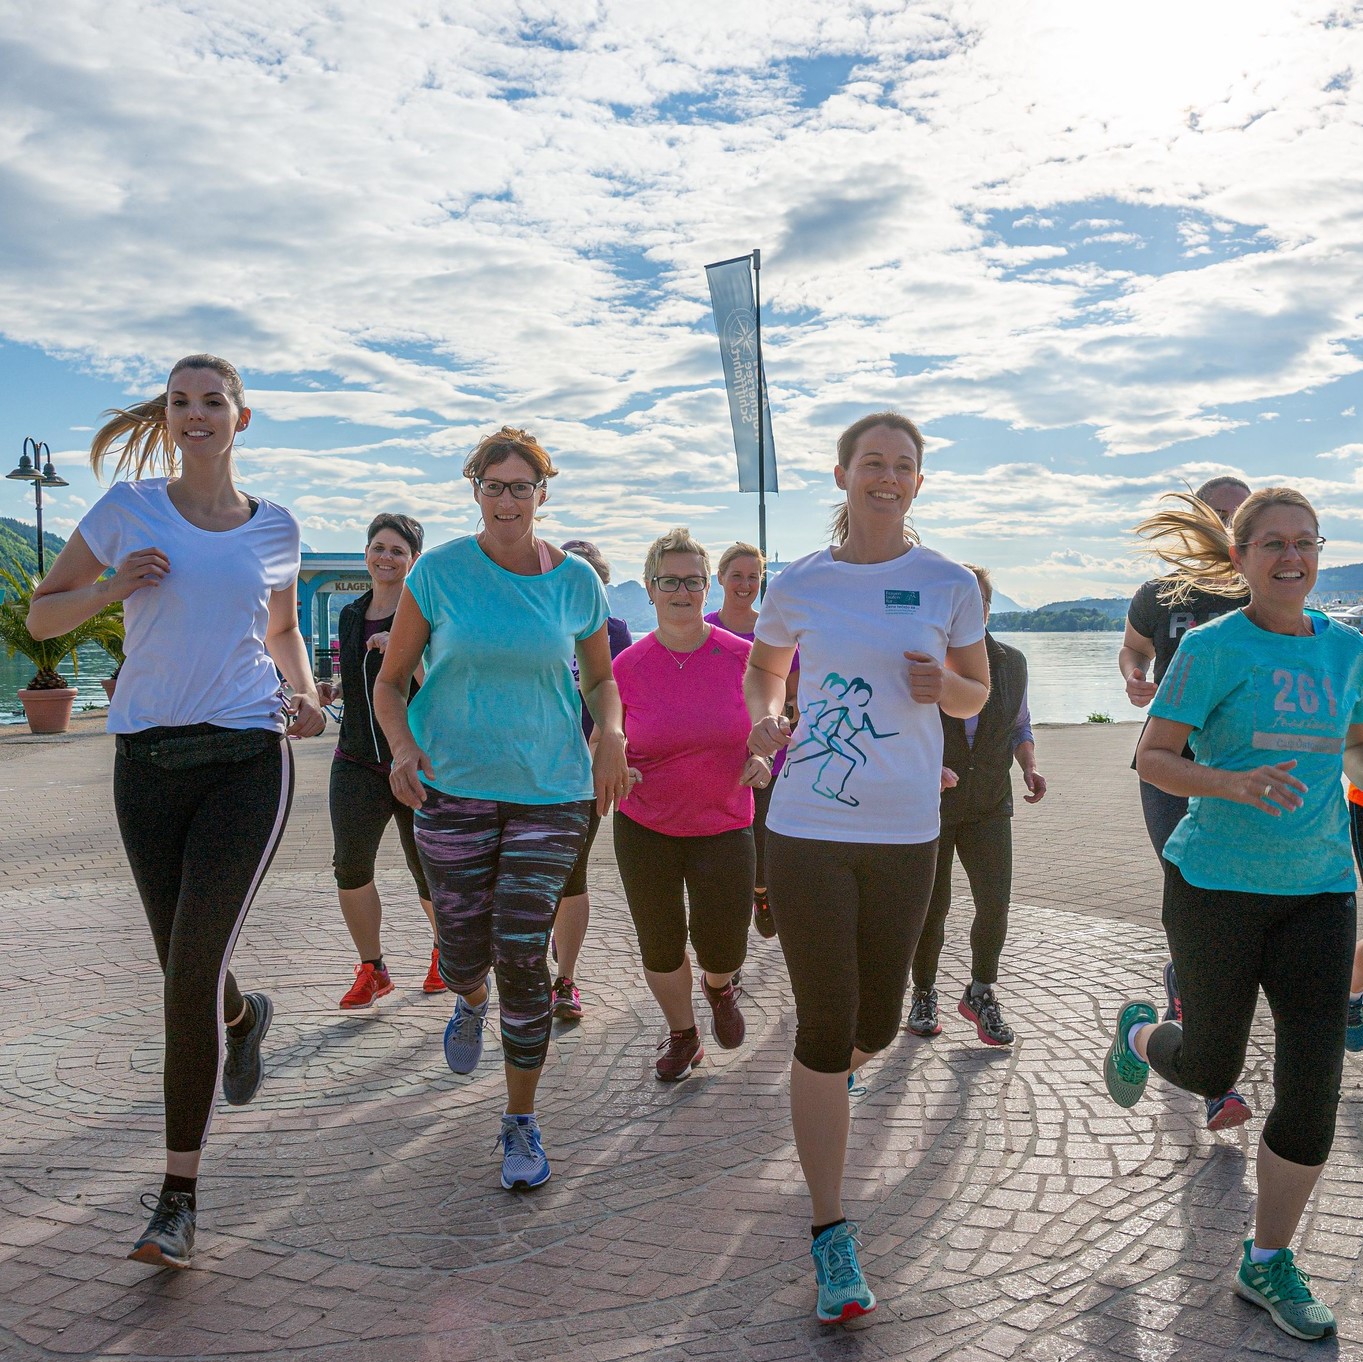 A group of smiling women in running gear enjoy a run together along a promenade with a river in the background - an image that reflects the sense of community and positive atmosphere at the 261 Fearless running club